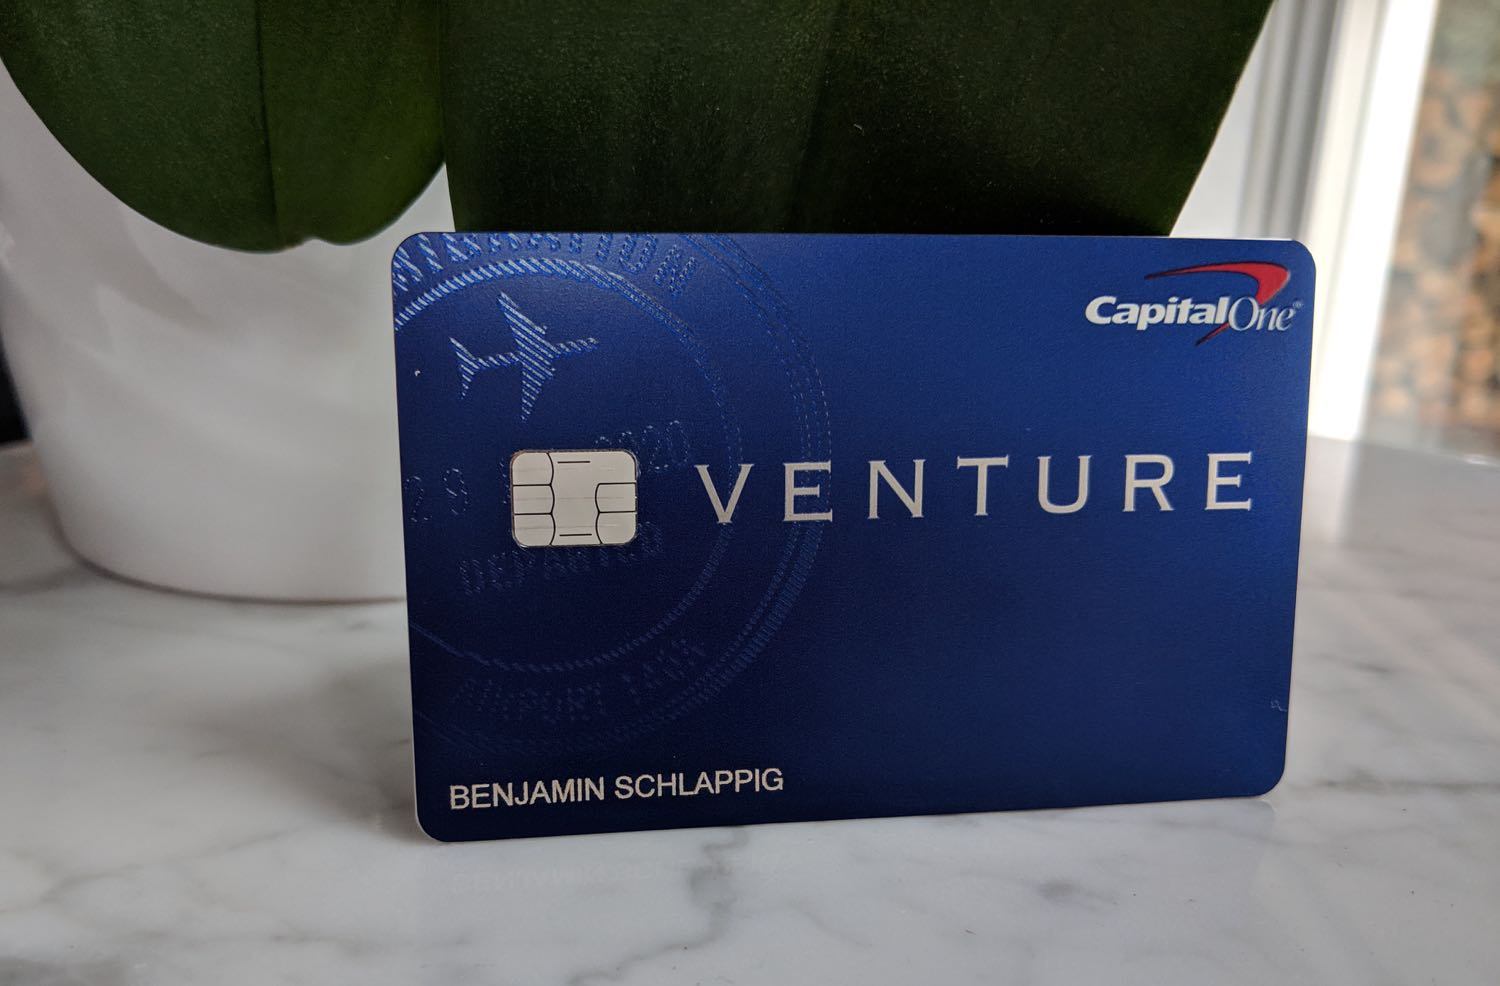 Find Out How to Apply for a Capital One Venture Credit Card - Venture Rewards